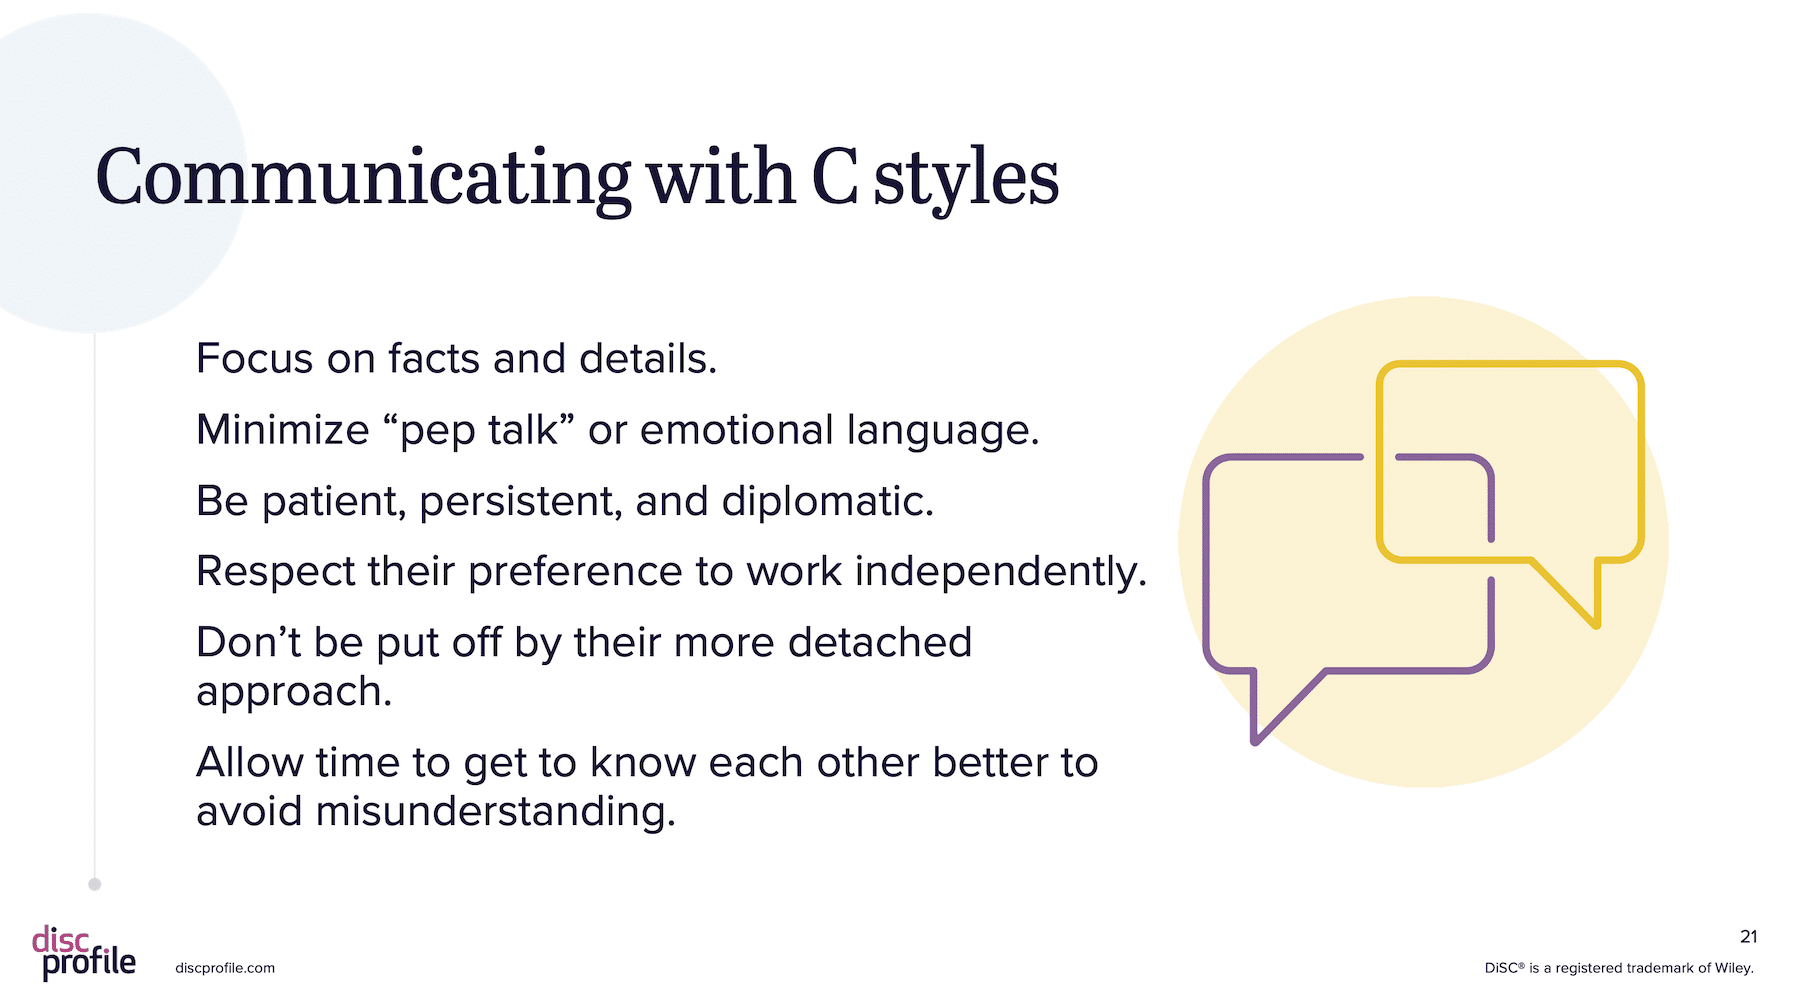 Graphic about communicating with C styles. Focus on facts, minimize emotional language, and don't be put off by their more detached approach.